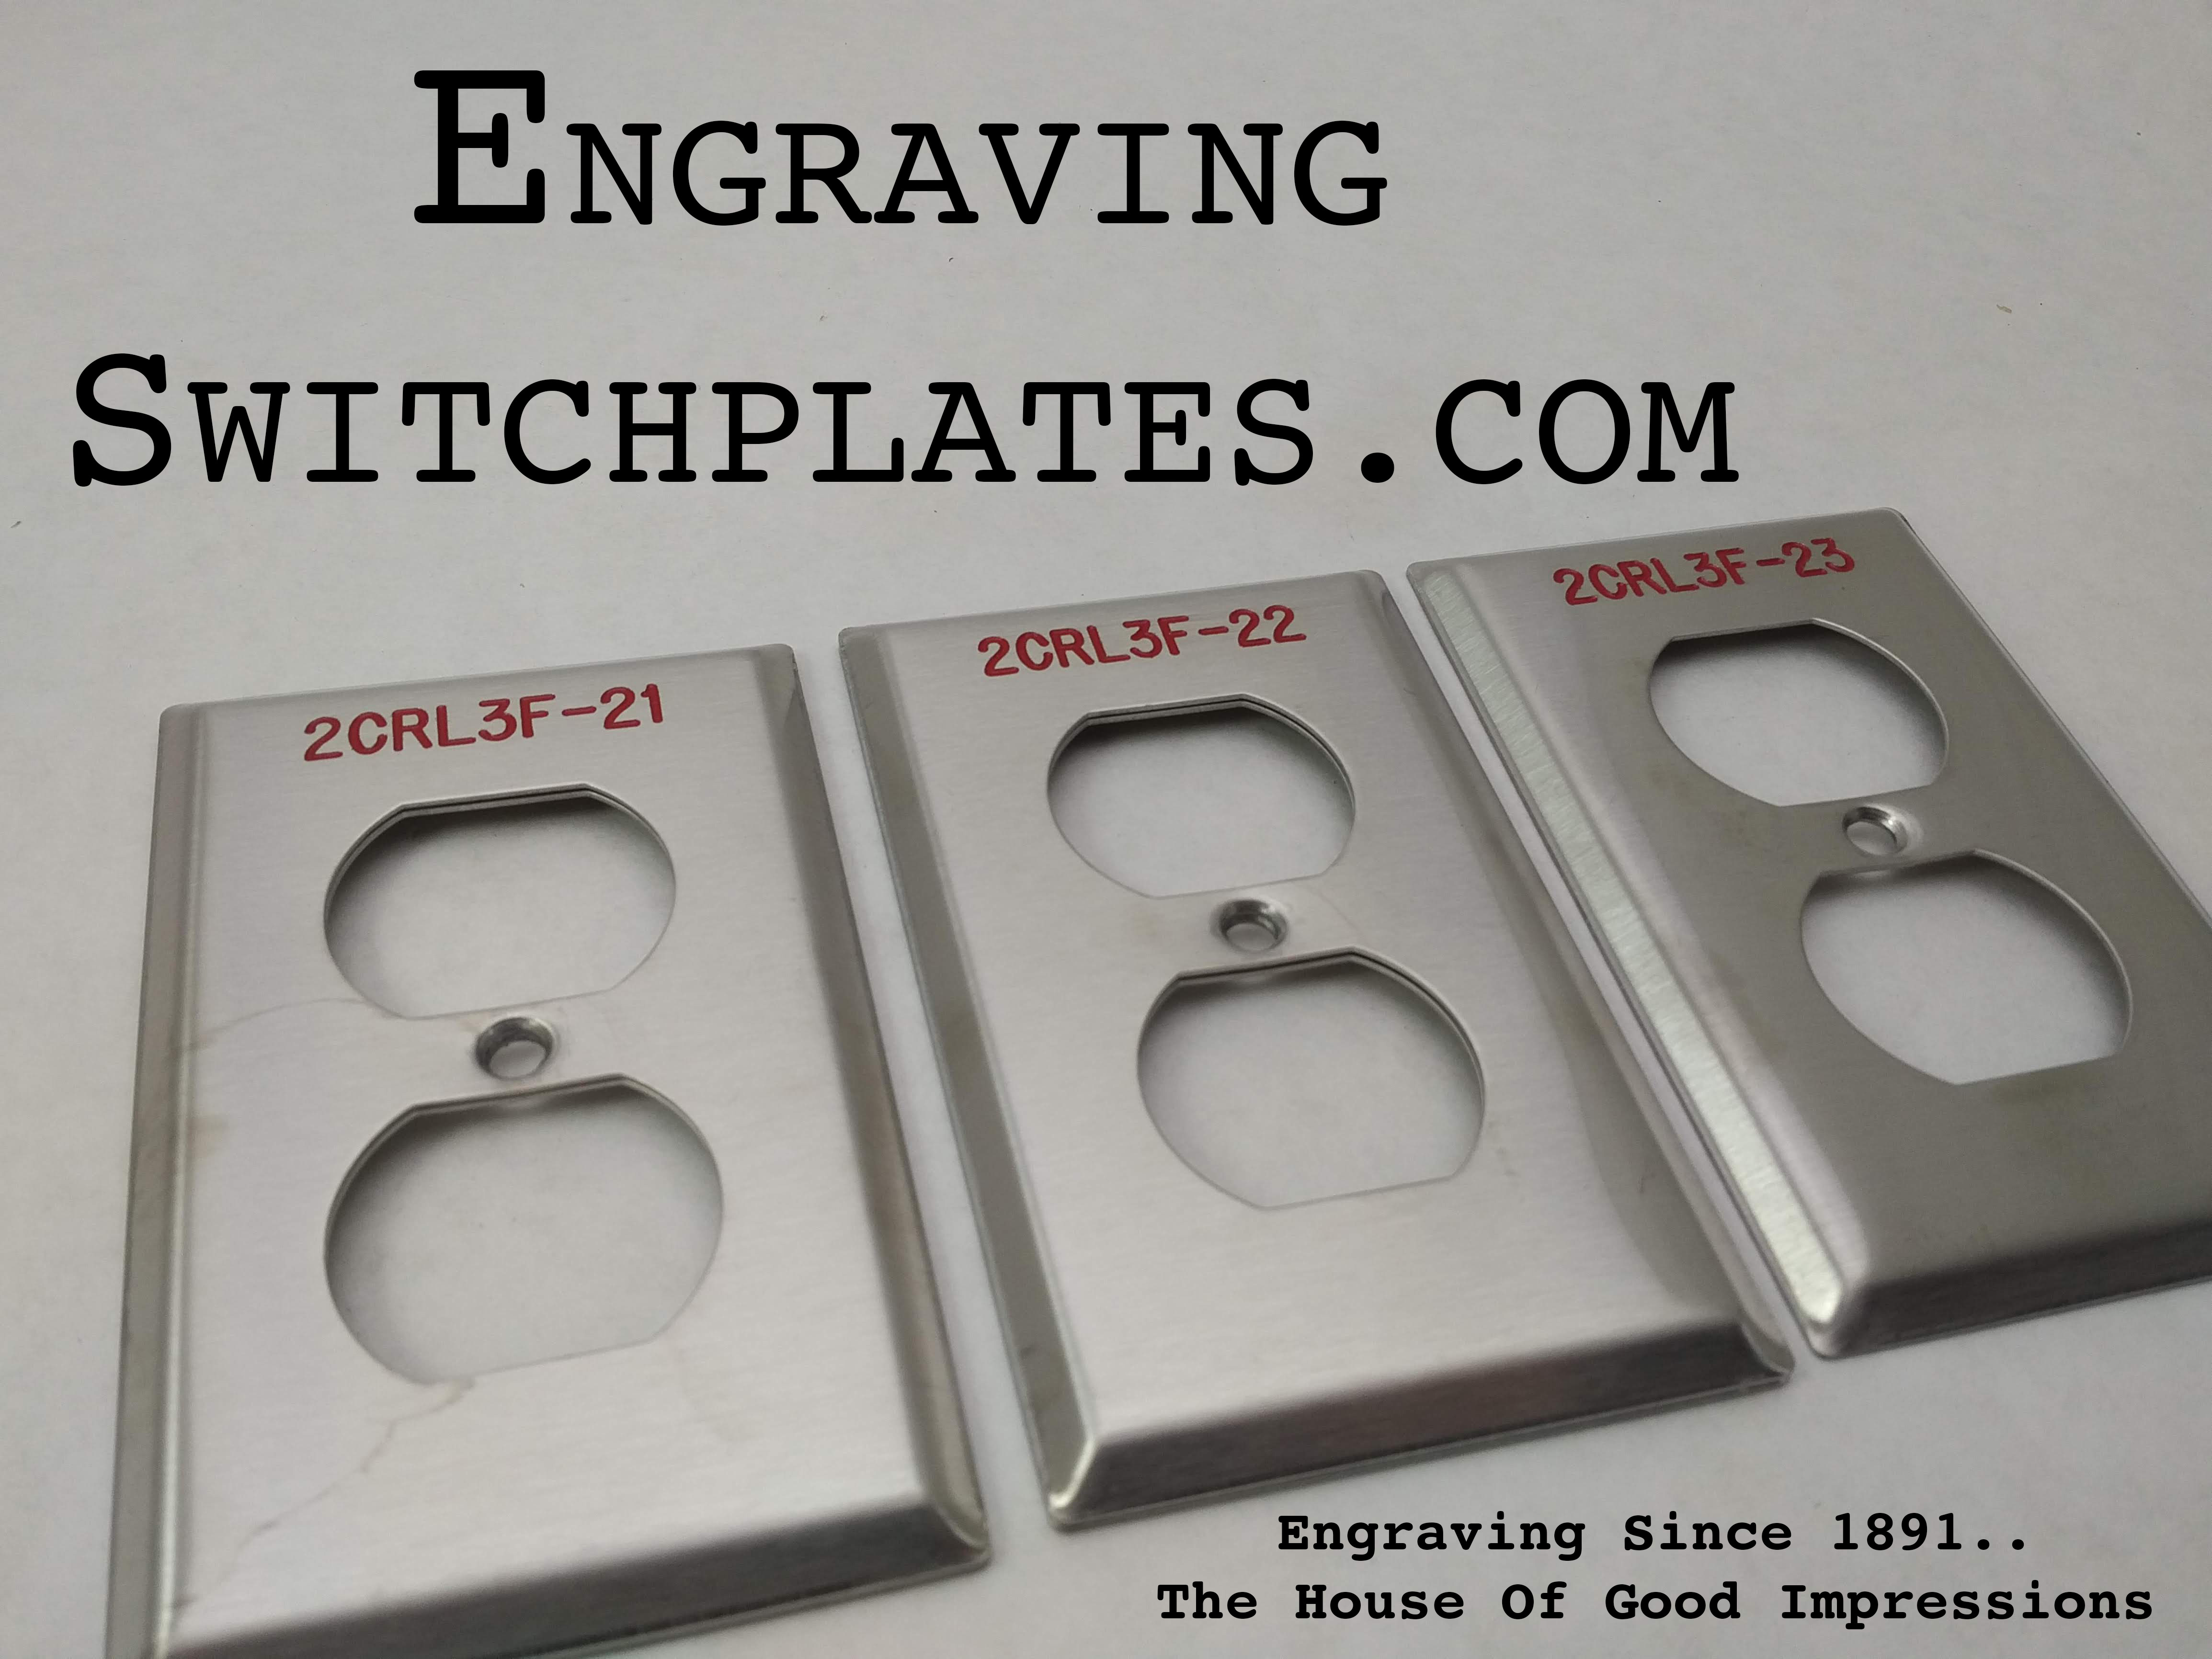 Engraved Device Covers